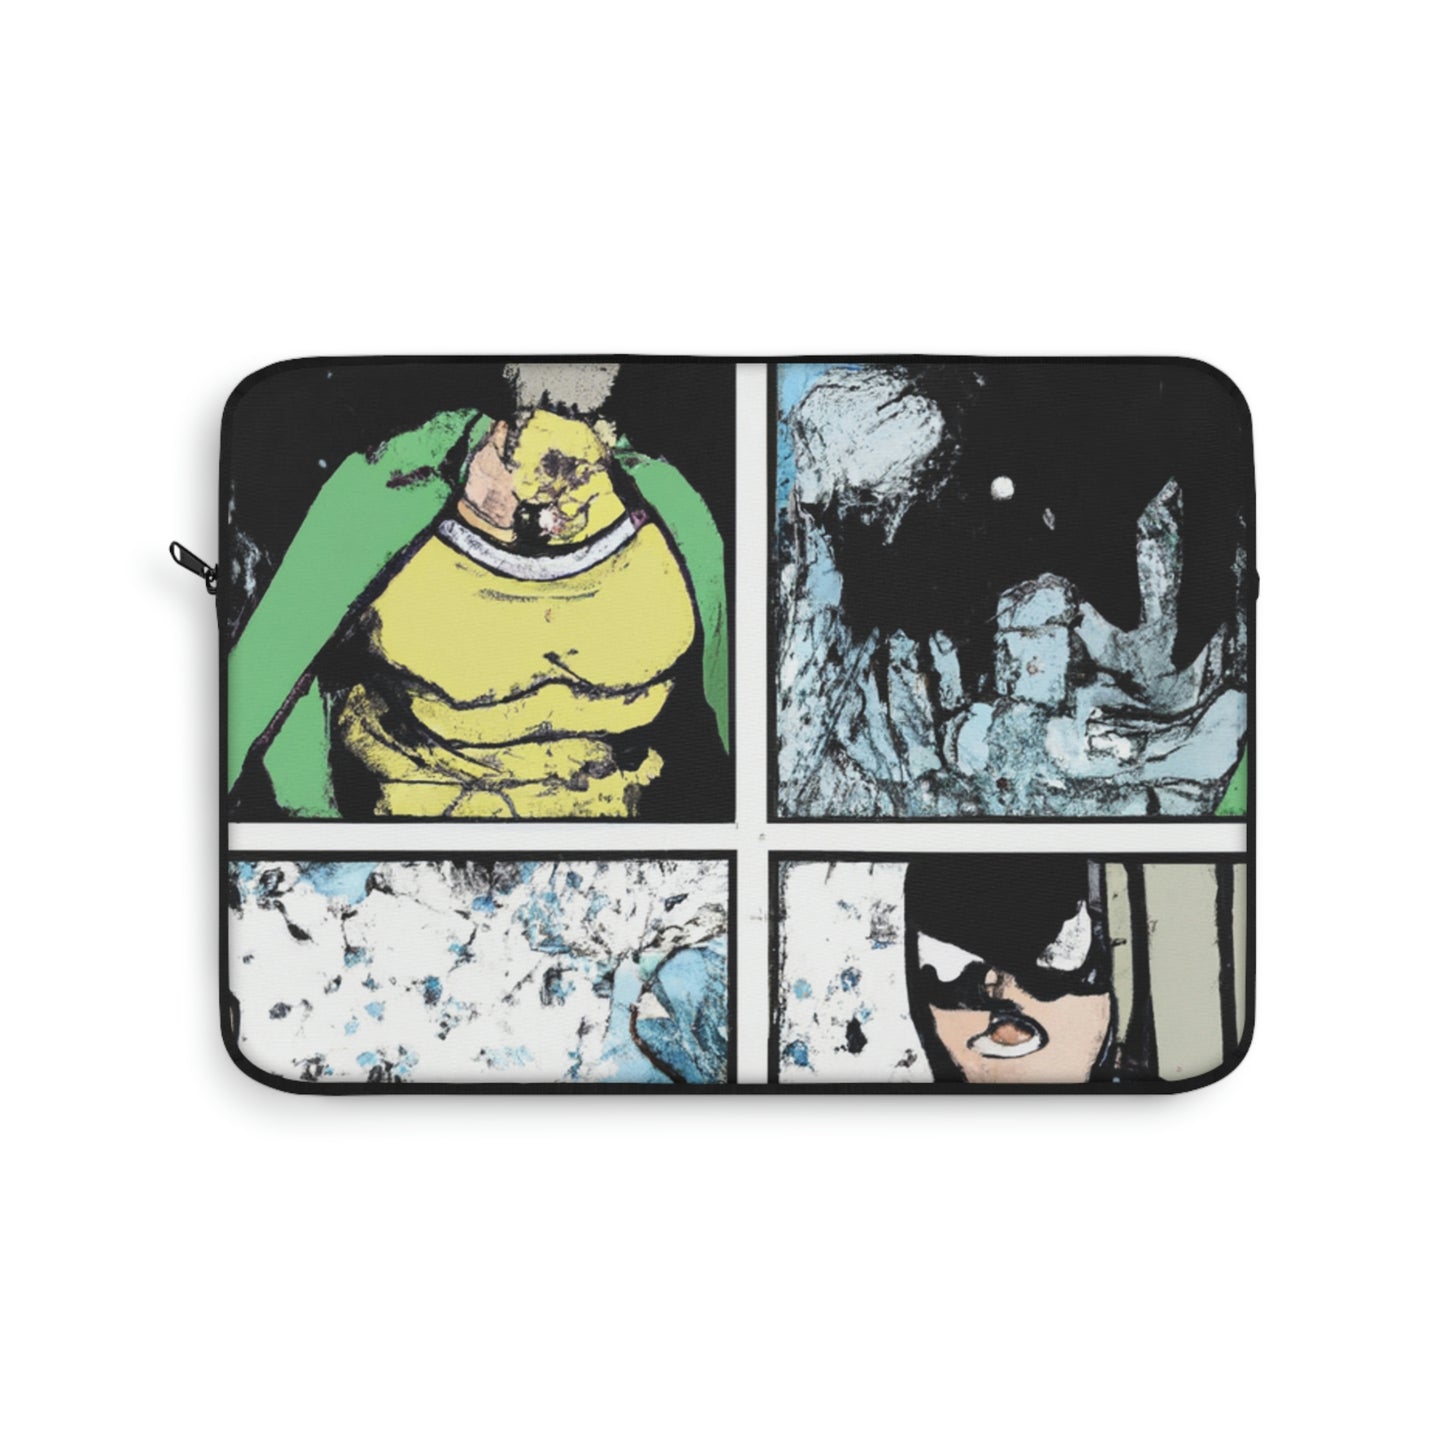 Biffy the Bopbot - Comic Book Collector Laptop Computer Sleeve Storage Case Bag